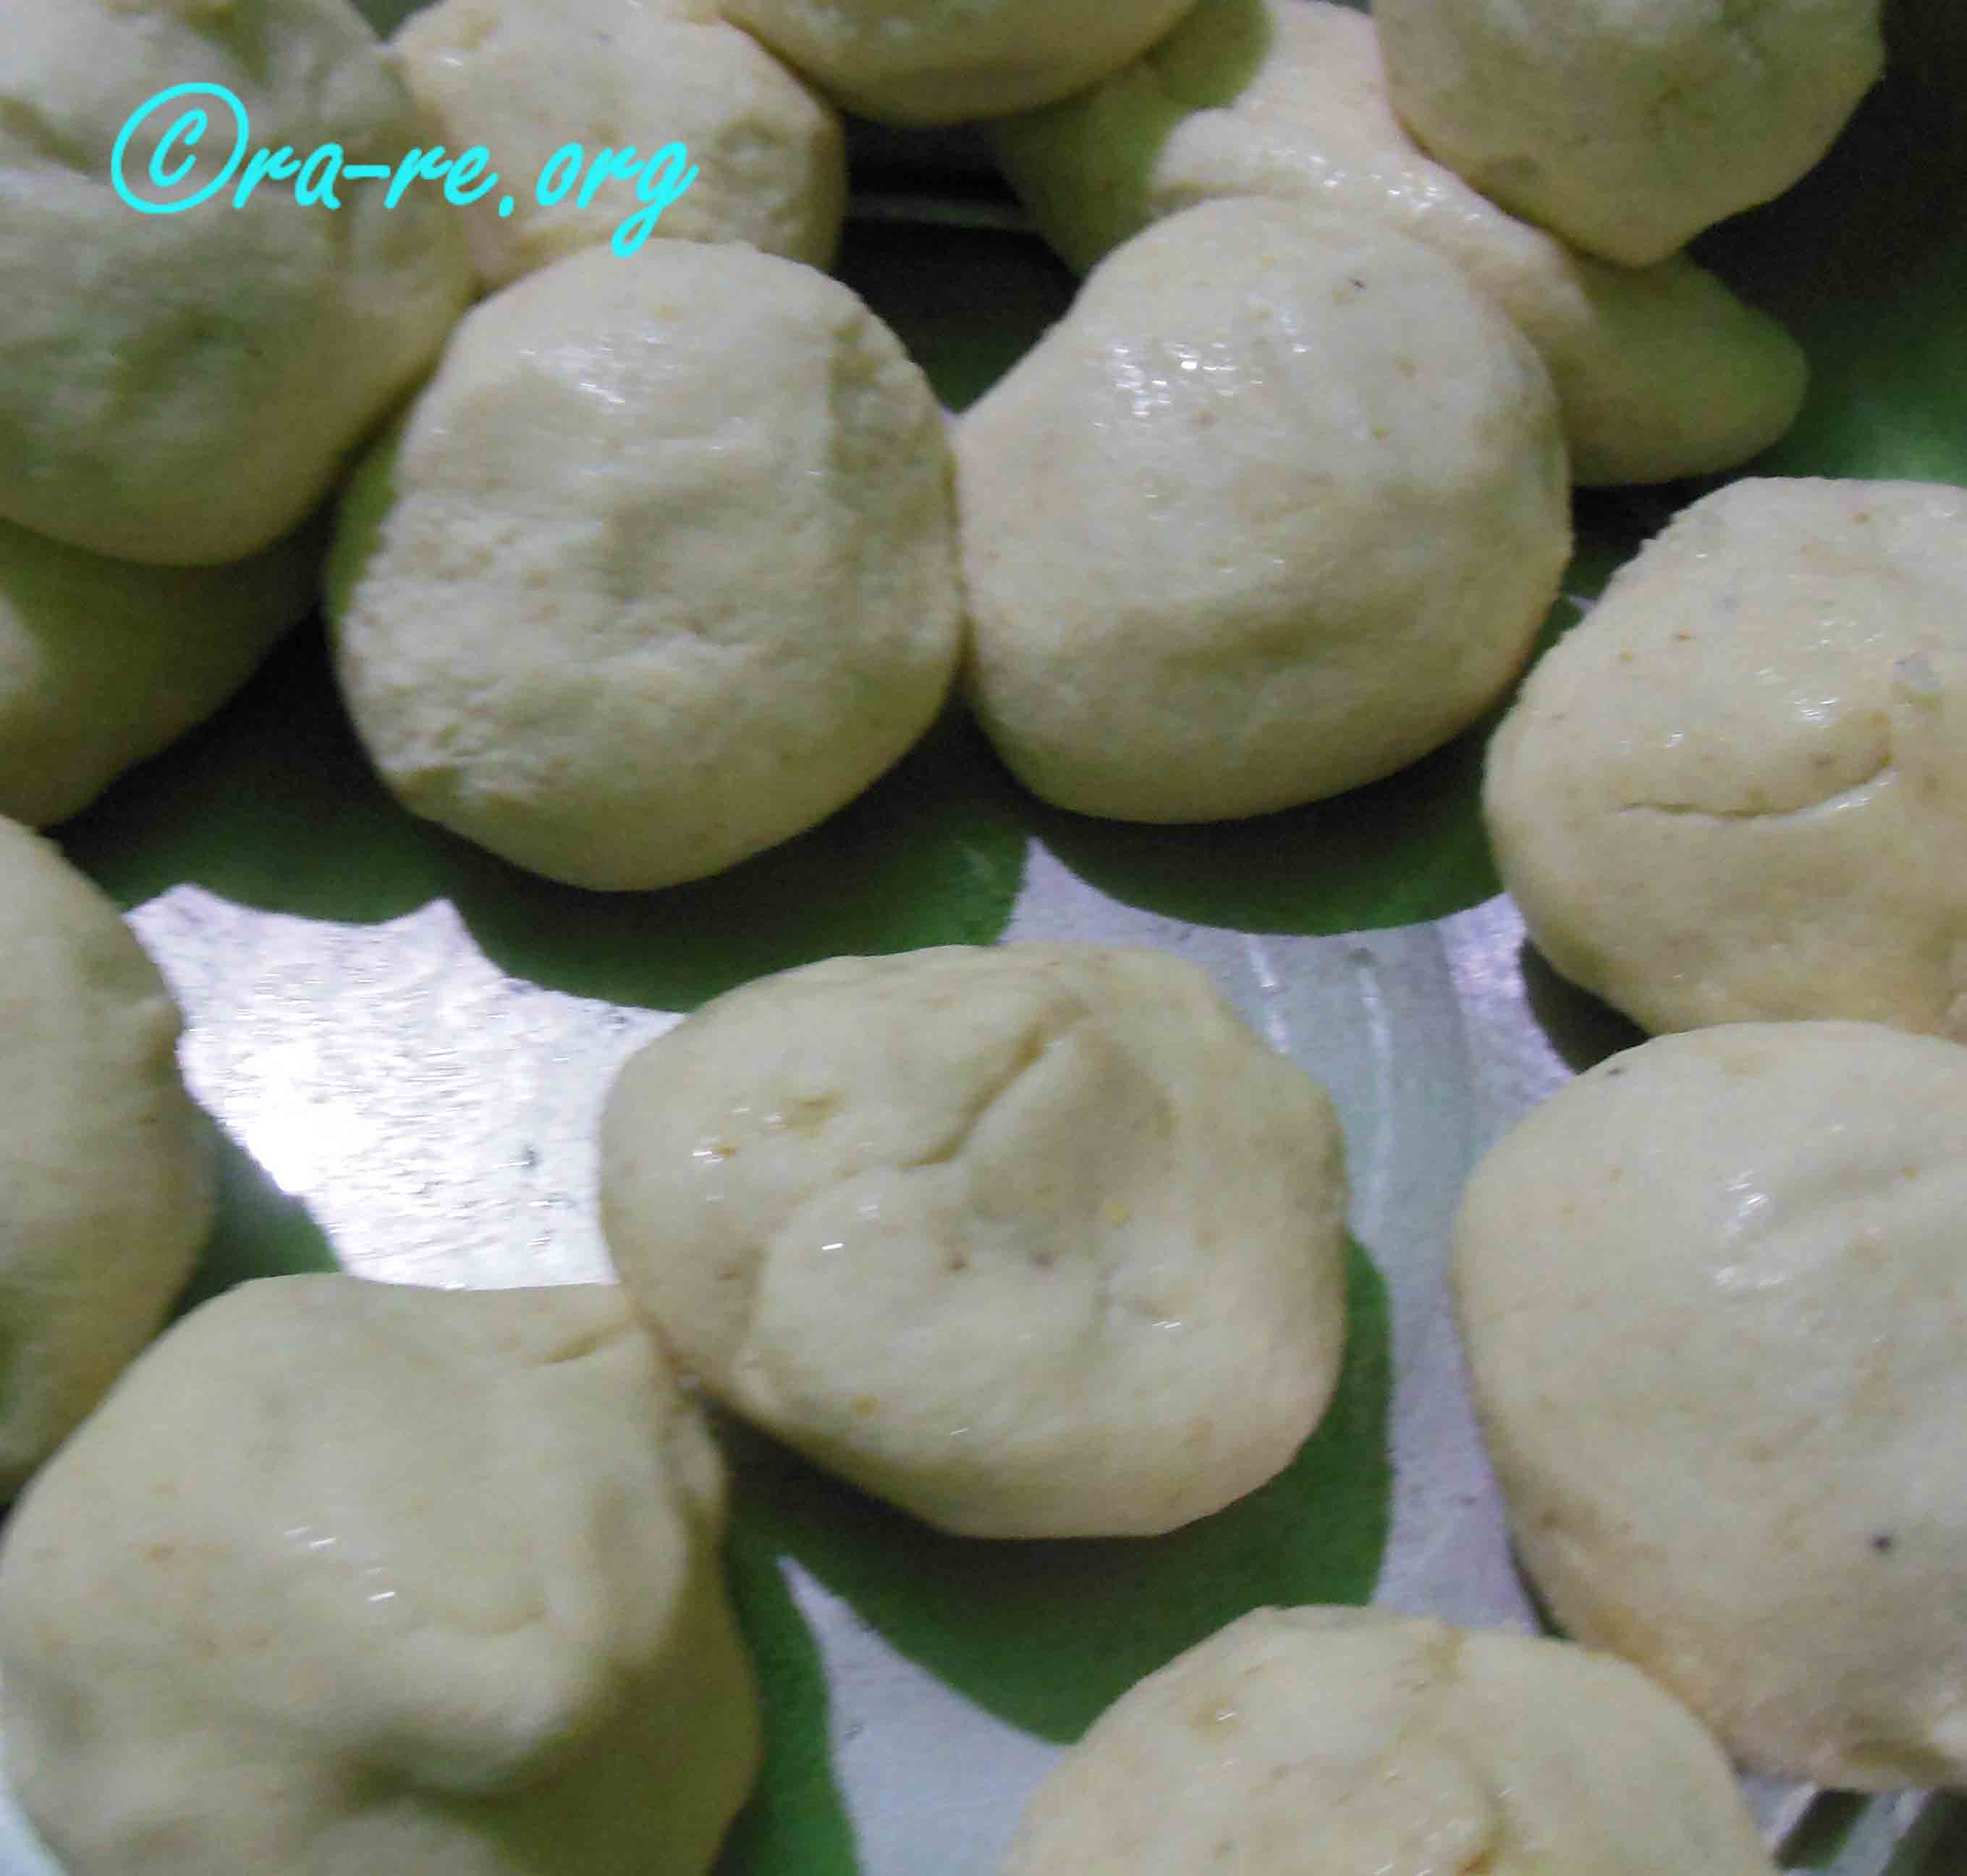 one-type-of-famous-sweet-prepared-from-coconut